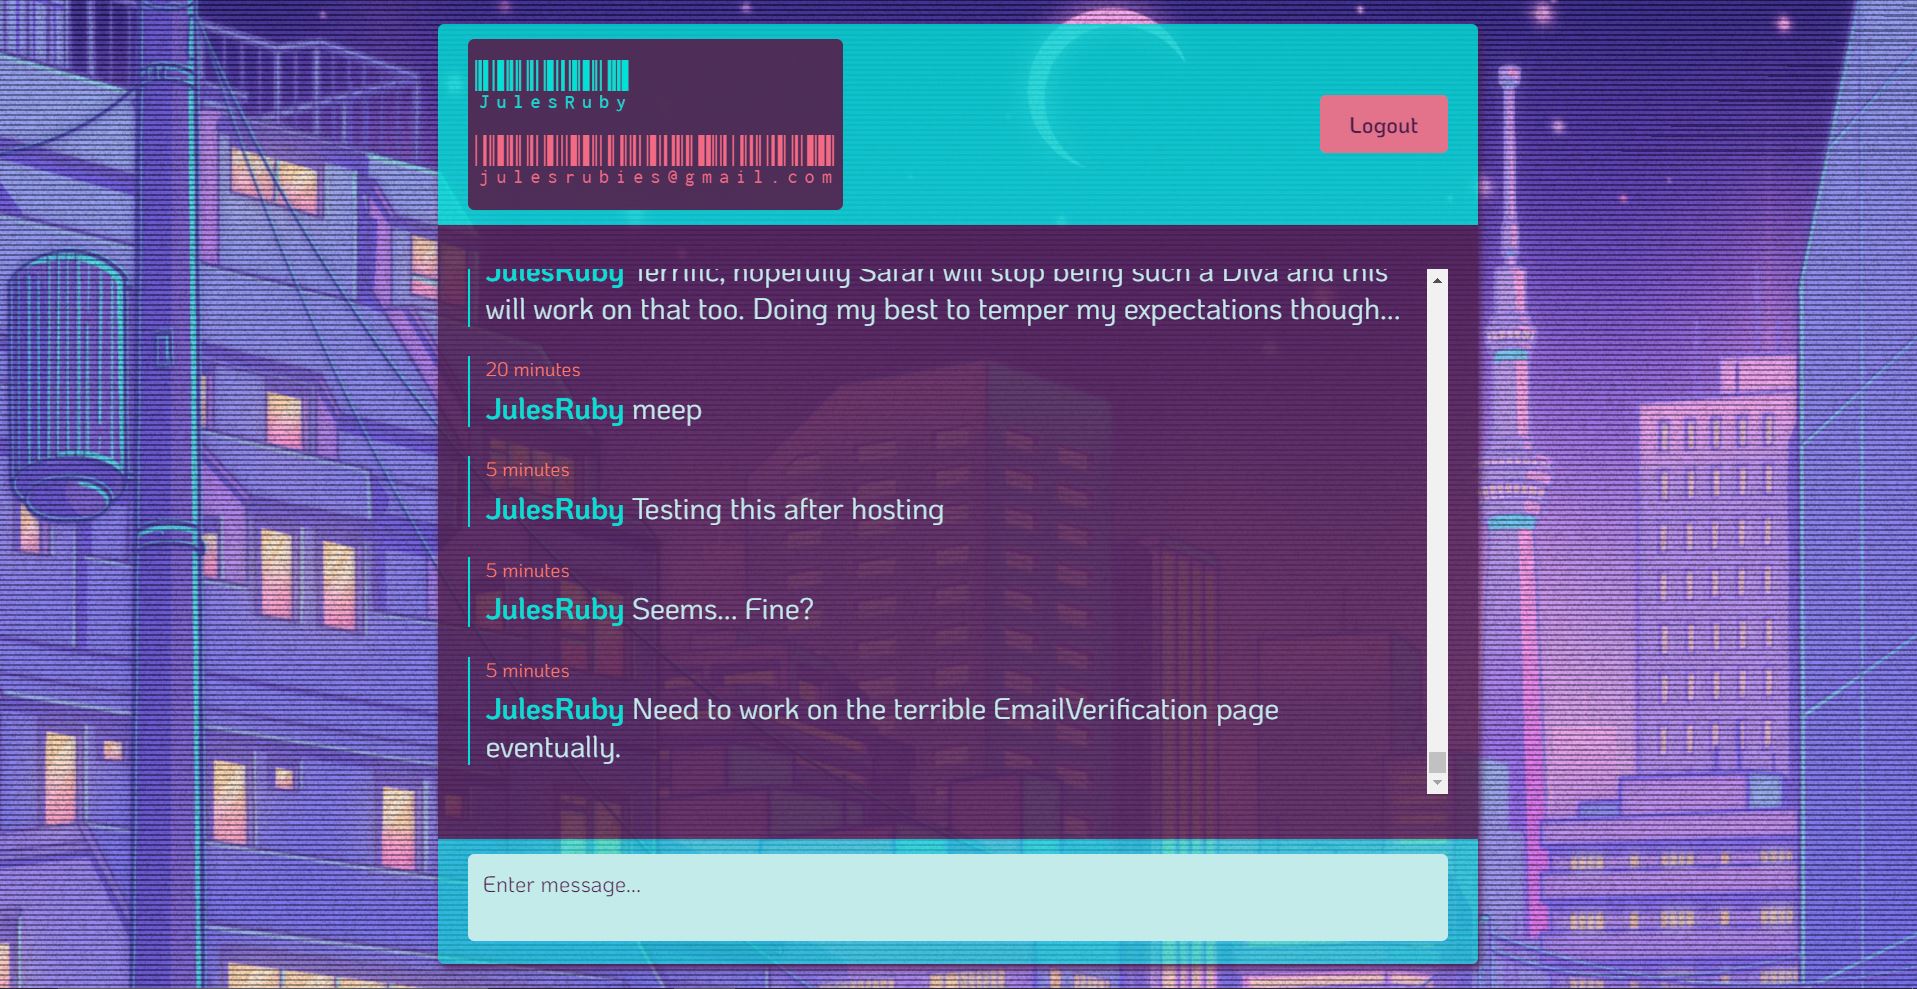 Preview still image of the chatroom.